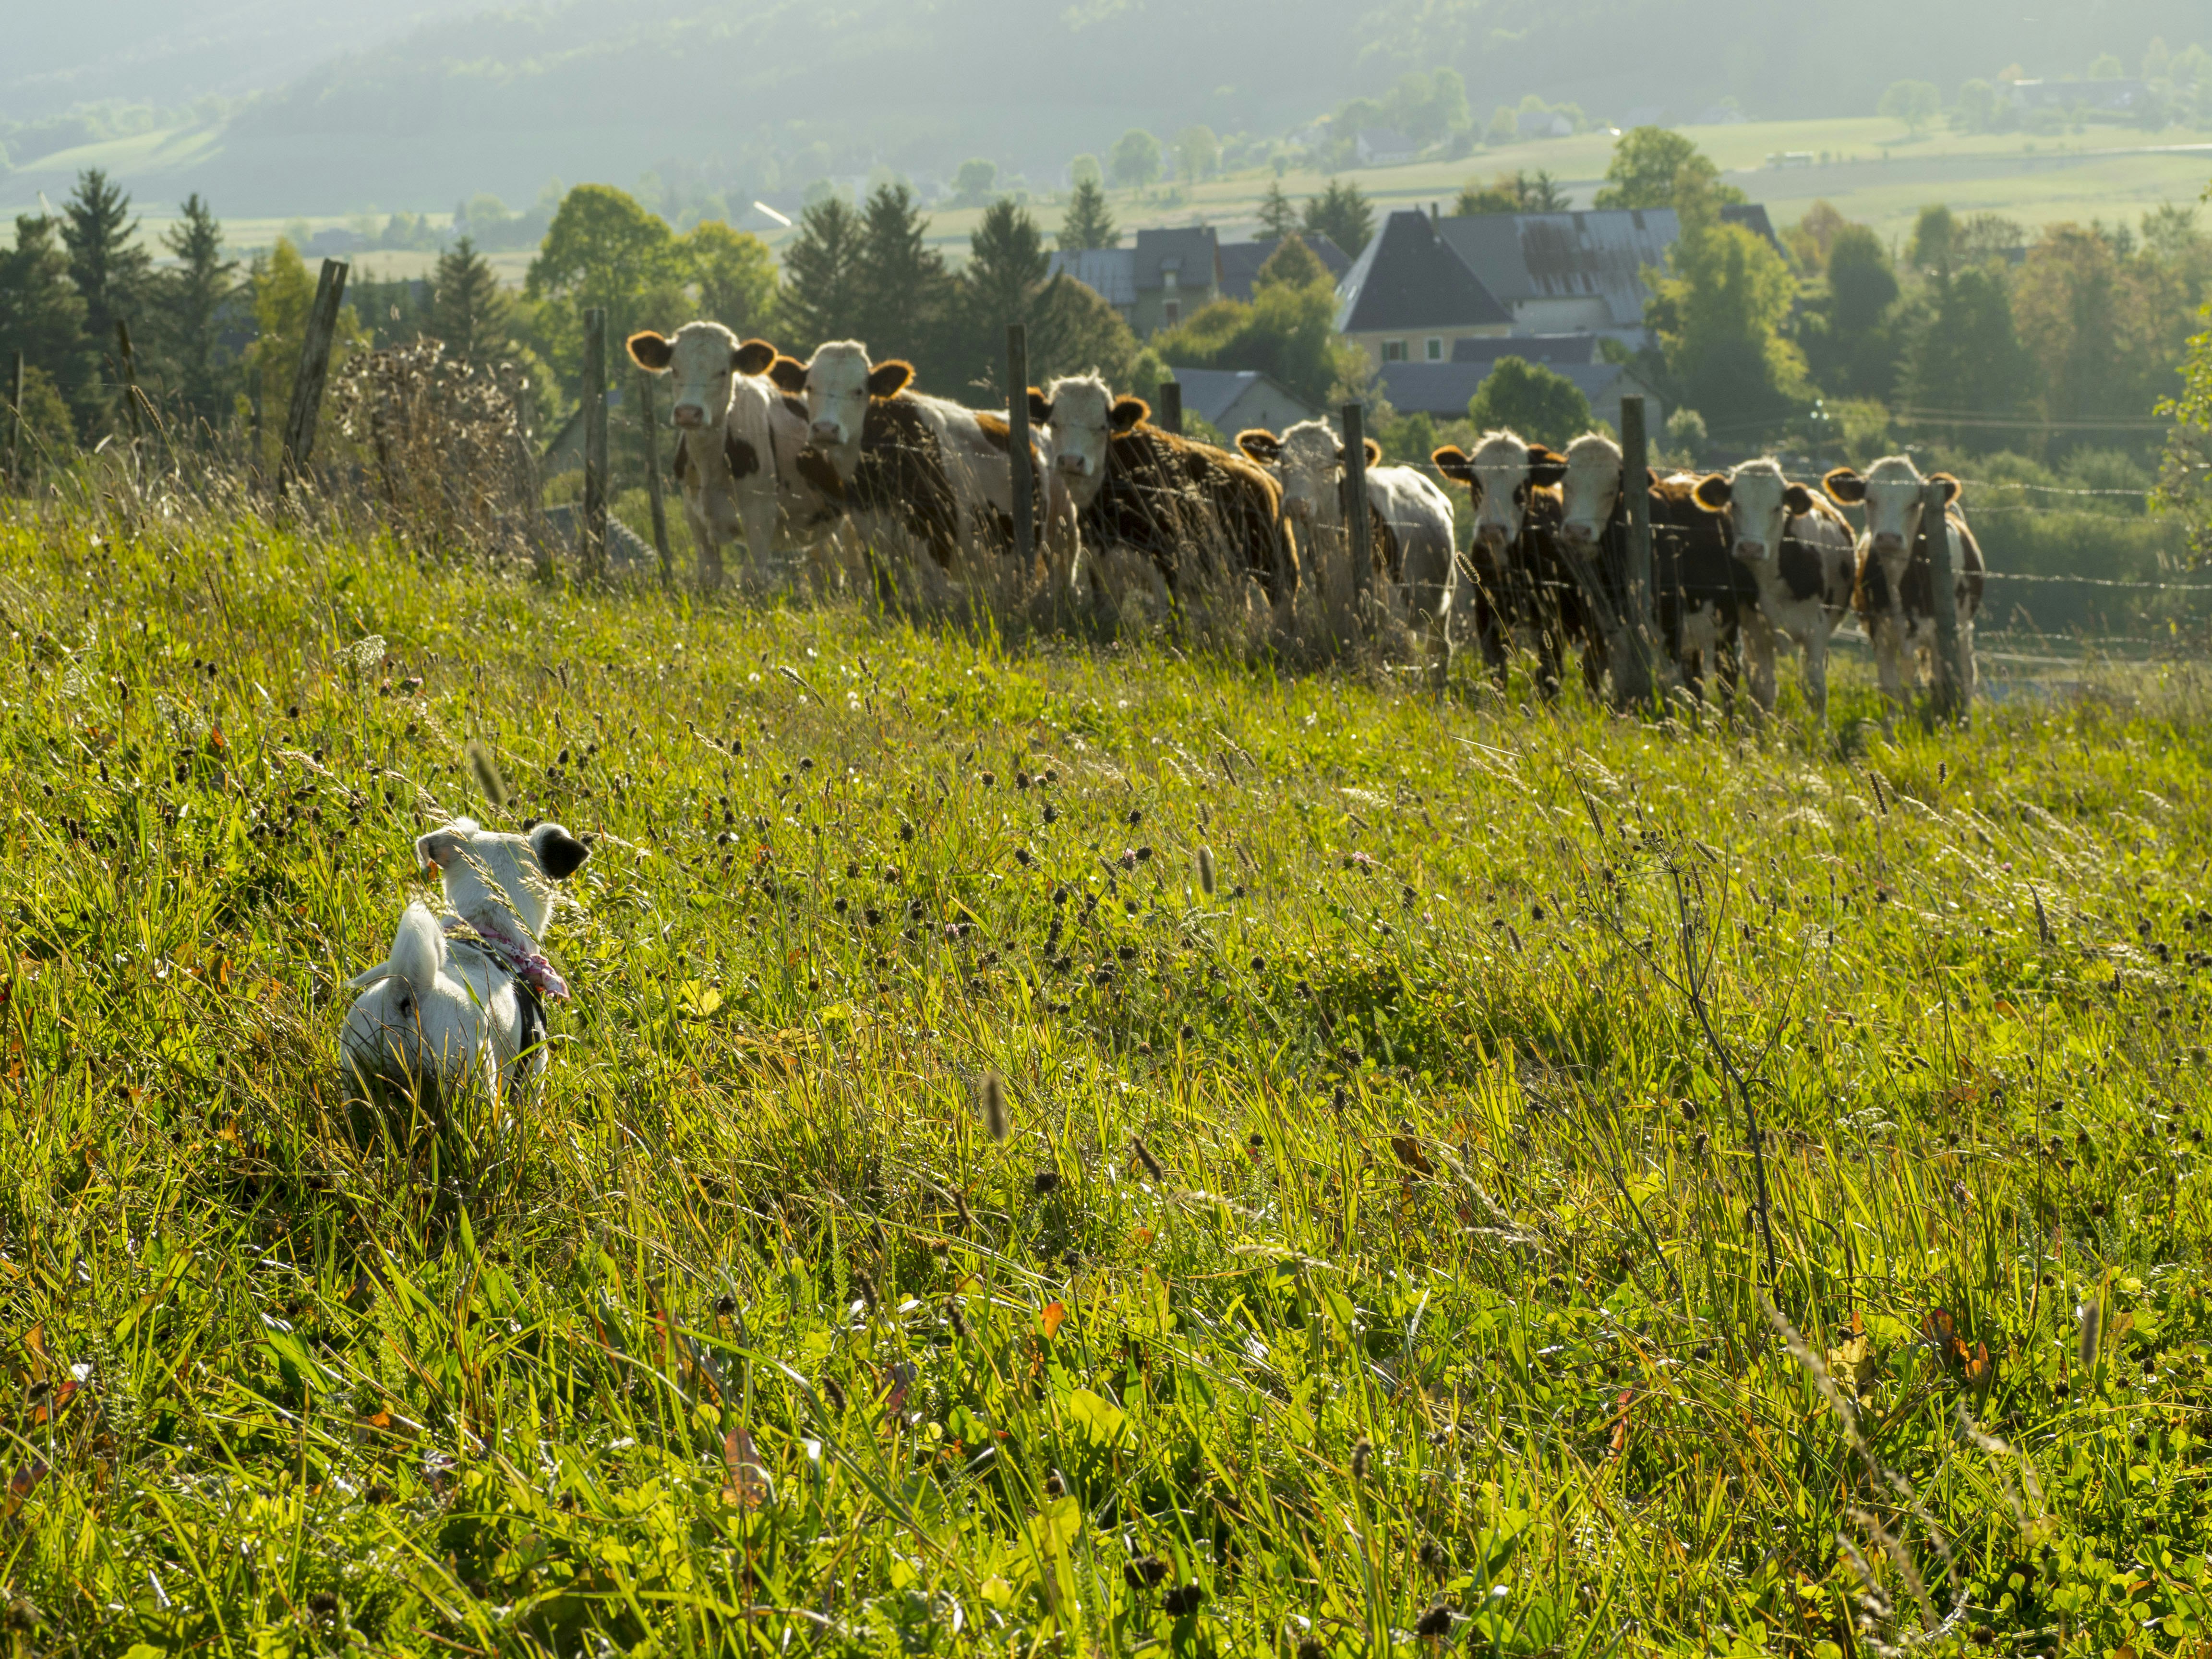 A small dog looks at some cows behind a fence